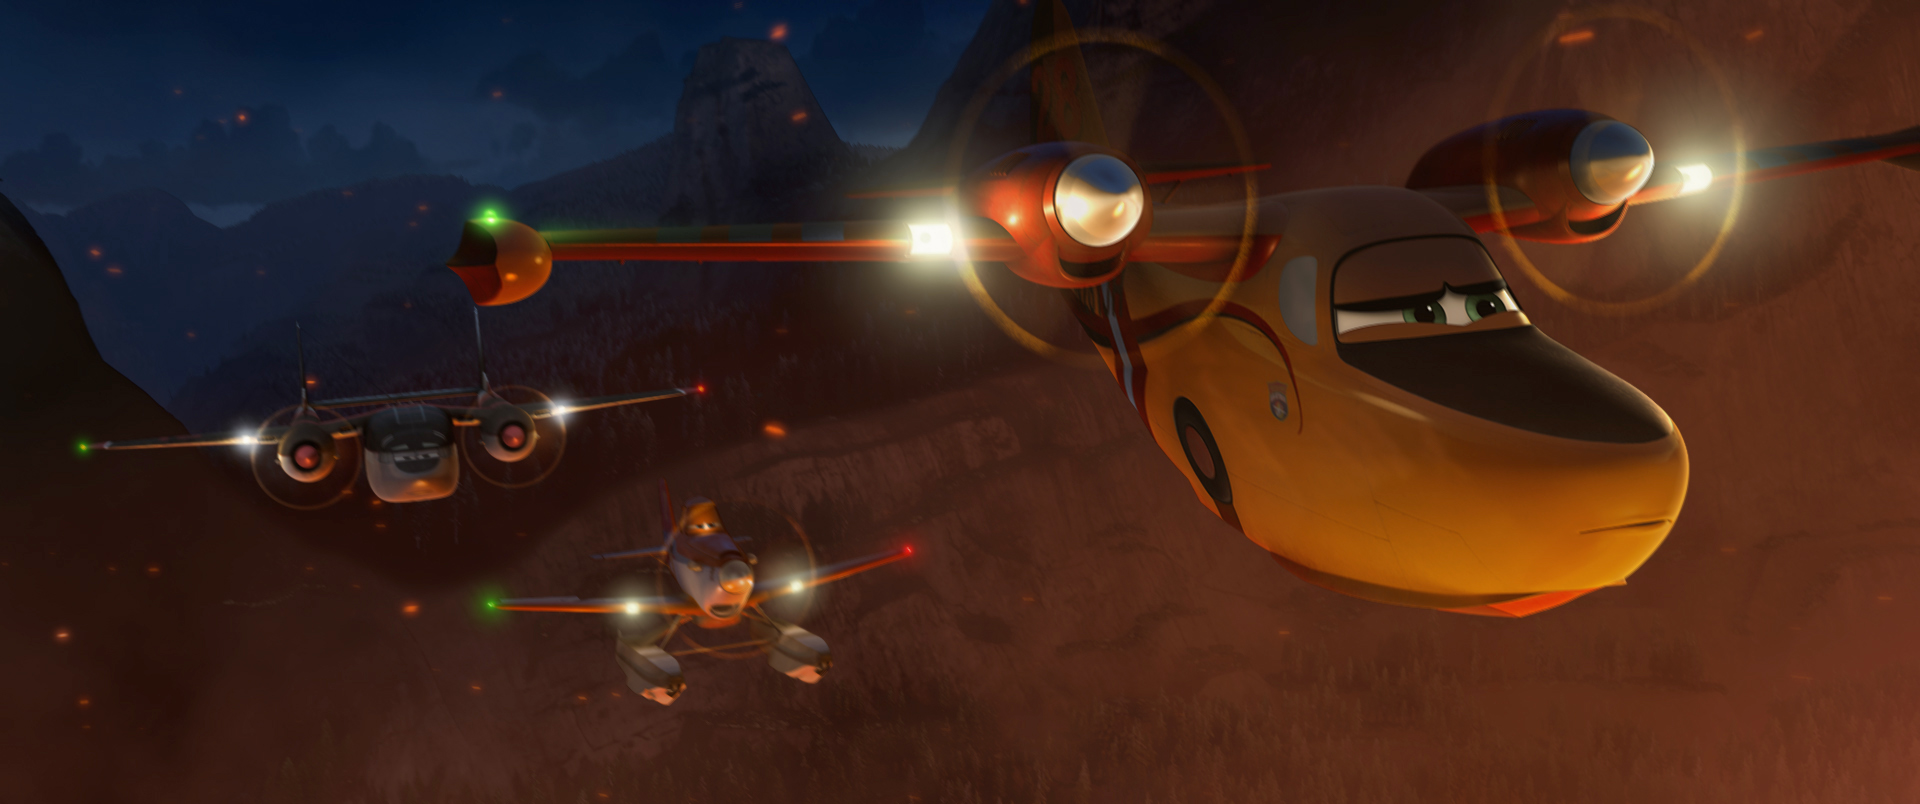 disney planes fire and rescue